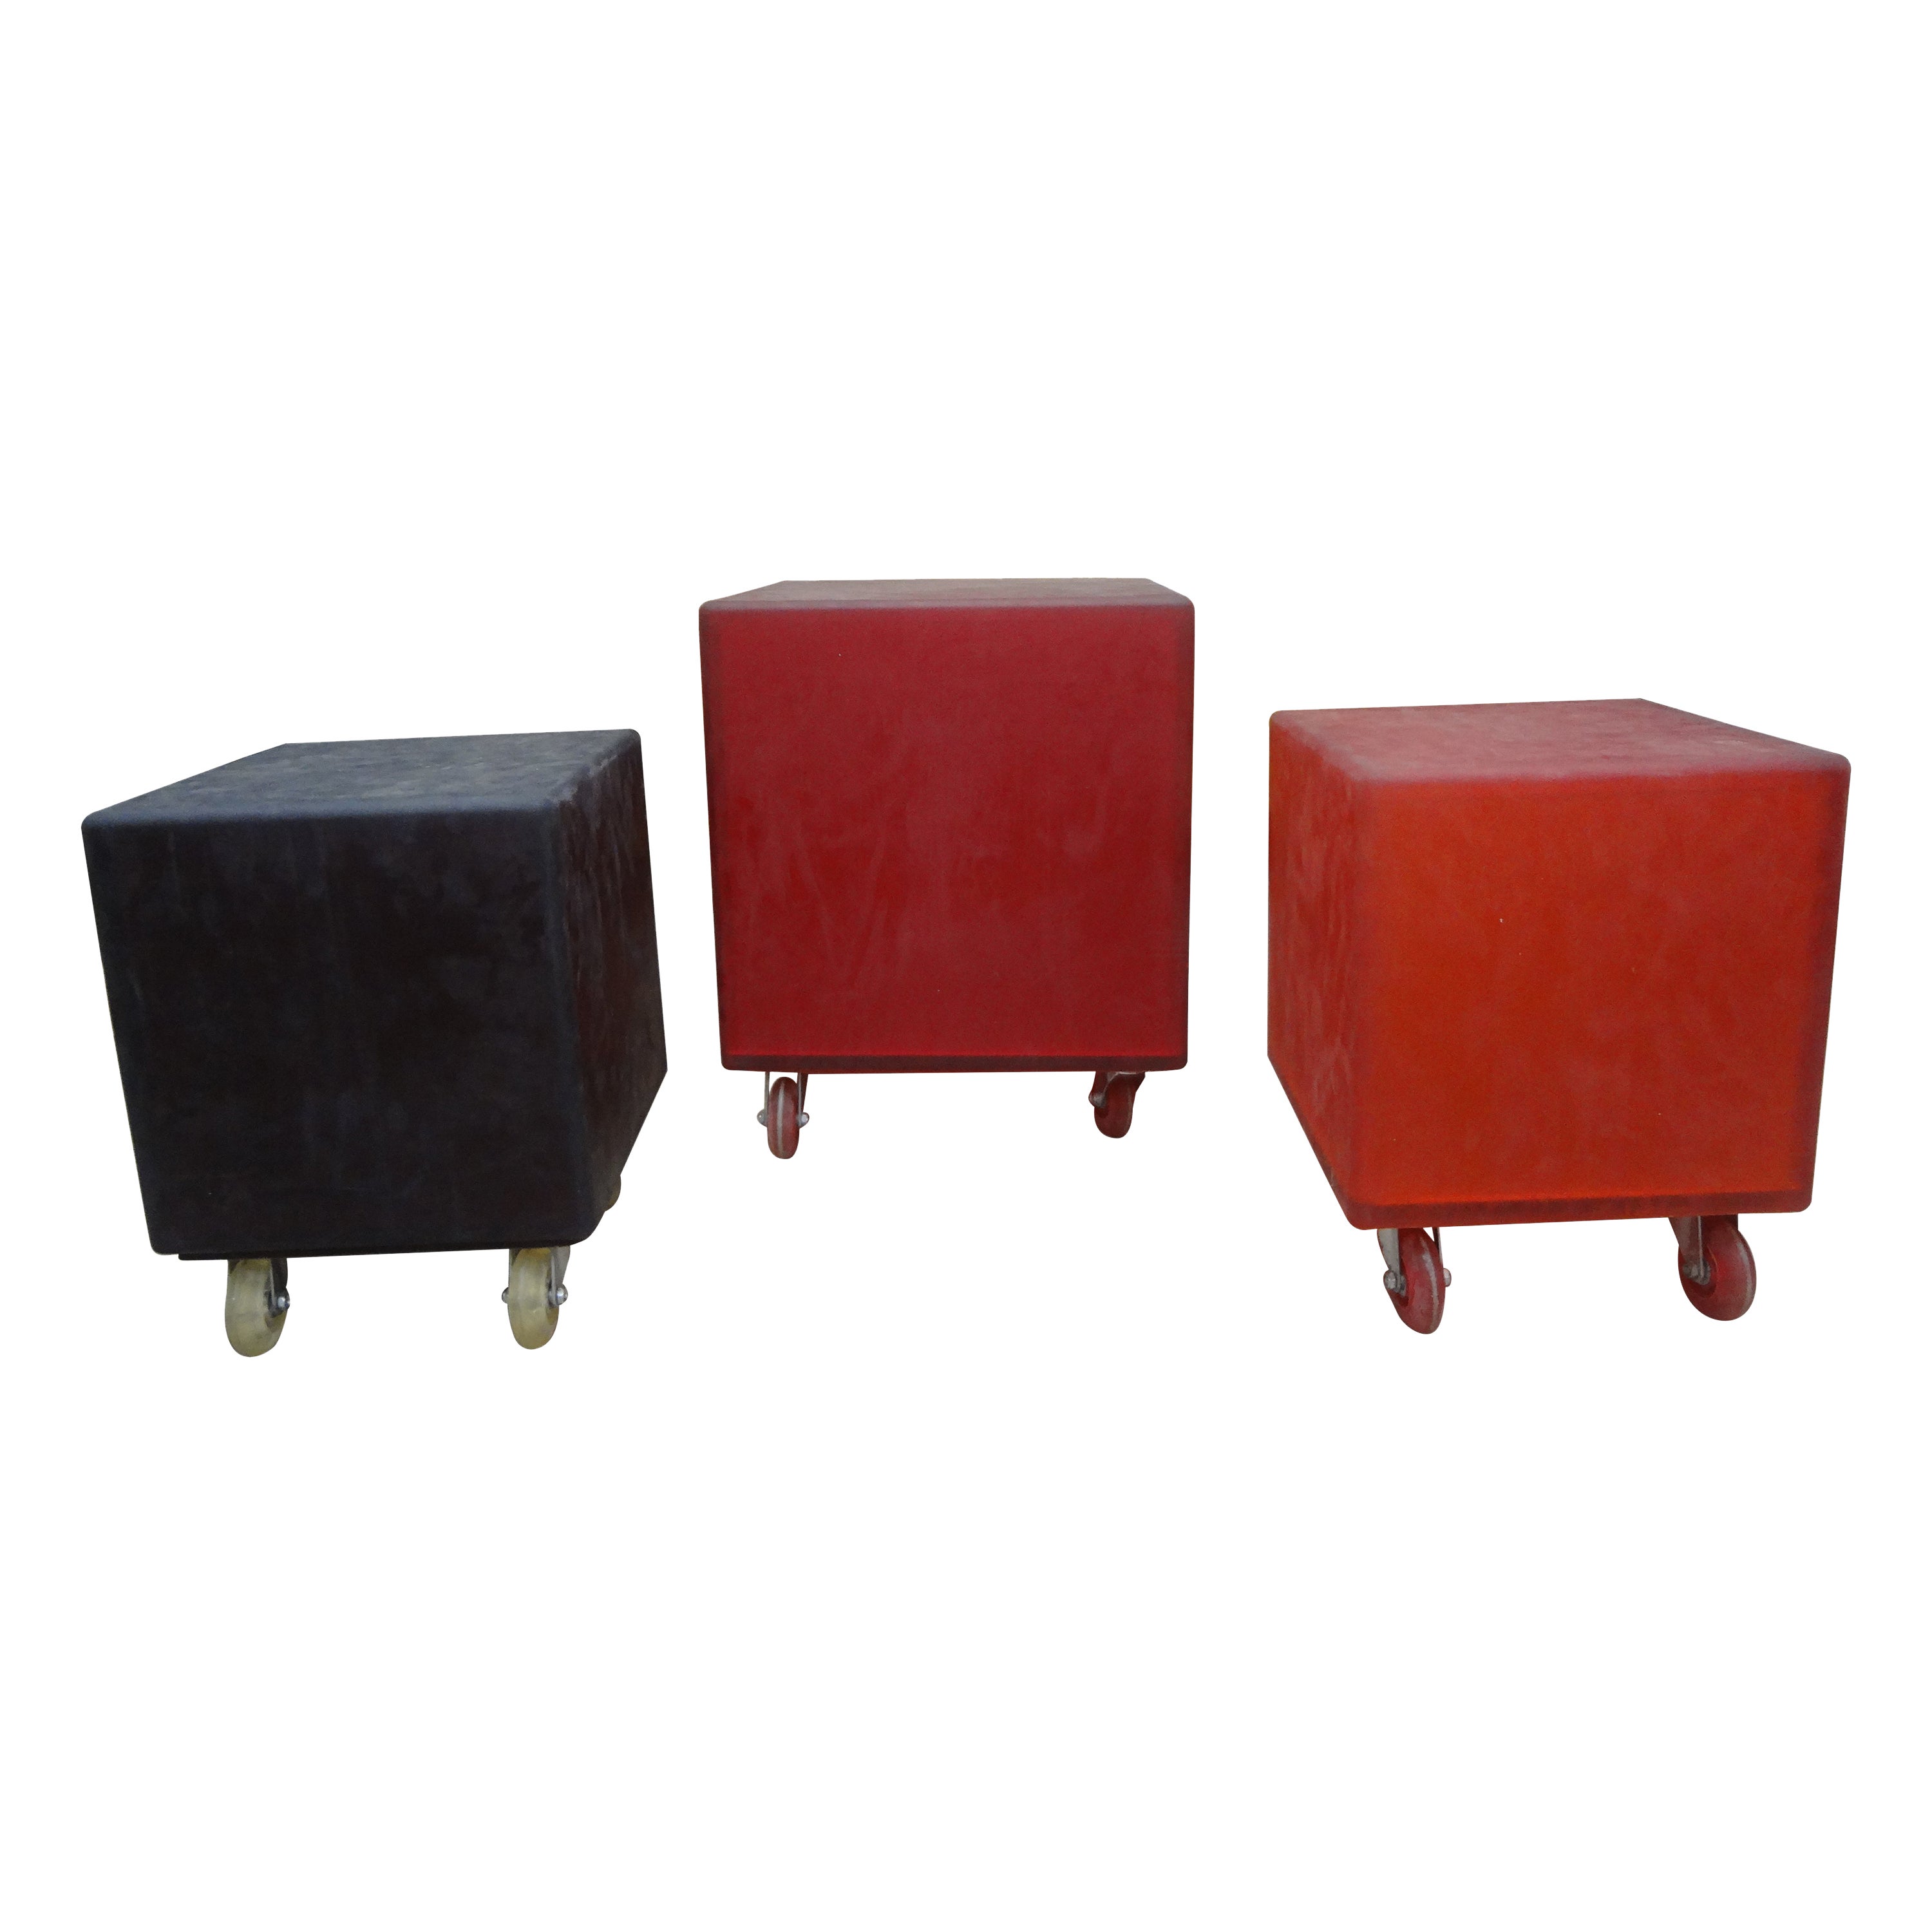 Set Of 3 Mid Century Modern Rubber Cube Tables Or Ottomans For Sale